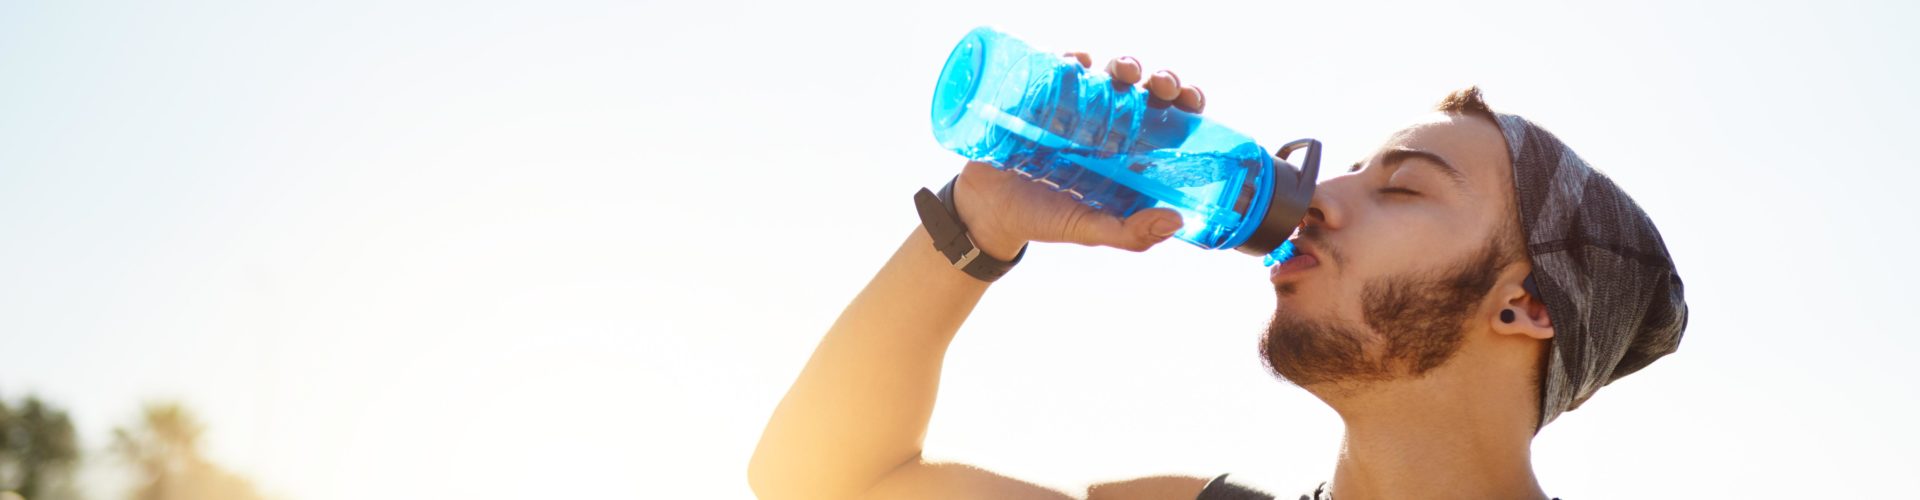 Shot of a sporty young man drinking water while exercising outdoors